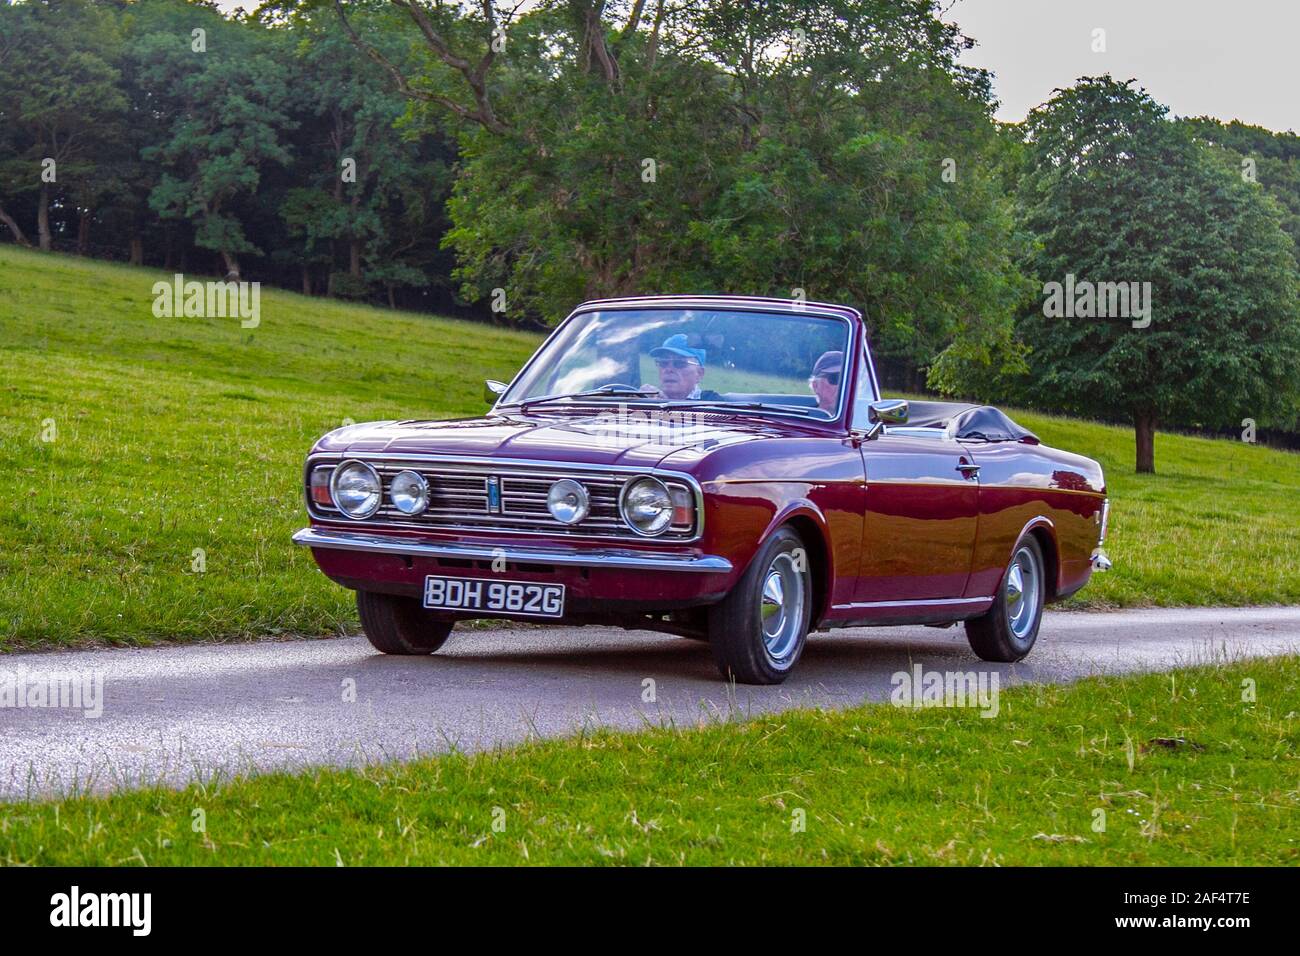 1969 60s maroon Ford Cortina 1600 GT; Classic cars, historics, cherished, old timers, collectable restored vintage veteran, vehicles of yesteryear arriving for the Mark Woodward historical motoring event at Leighton Hall, Carnforth, UK Stock Photo